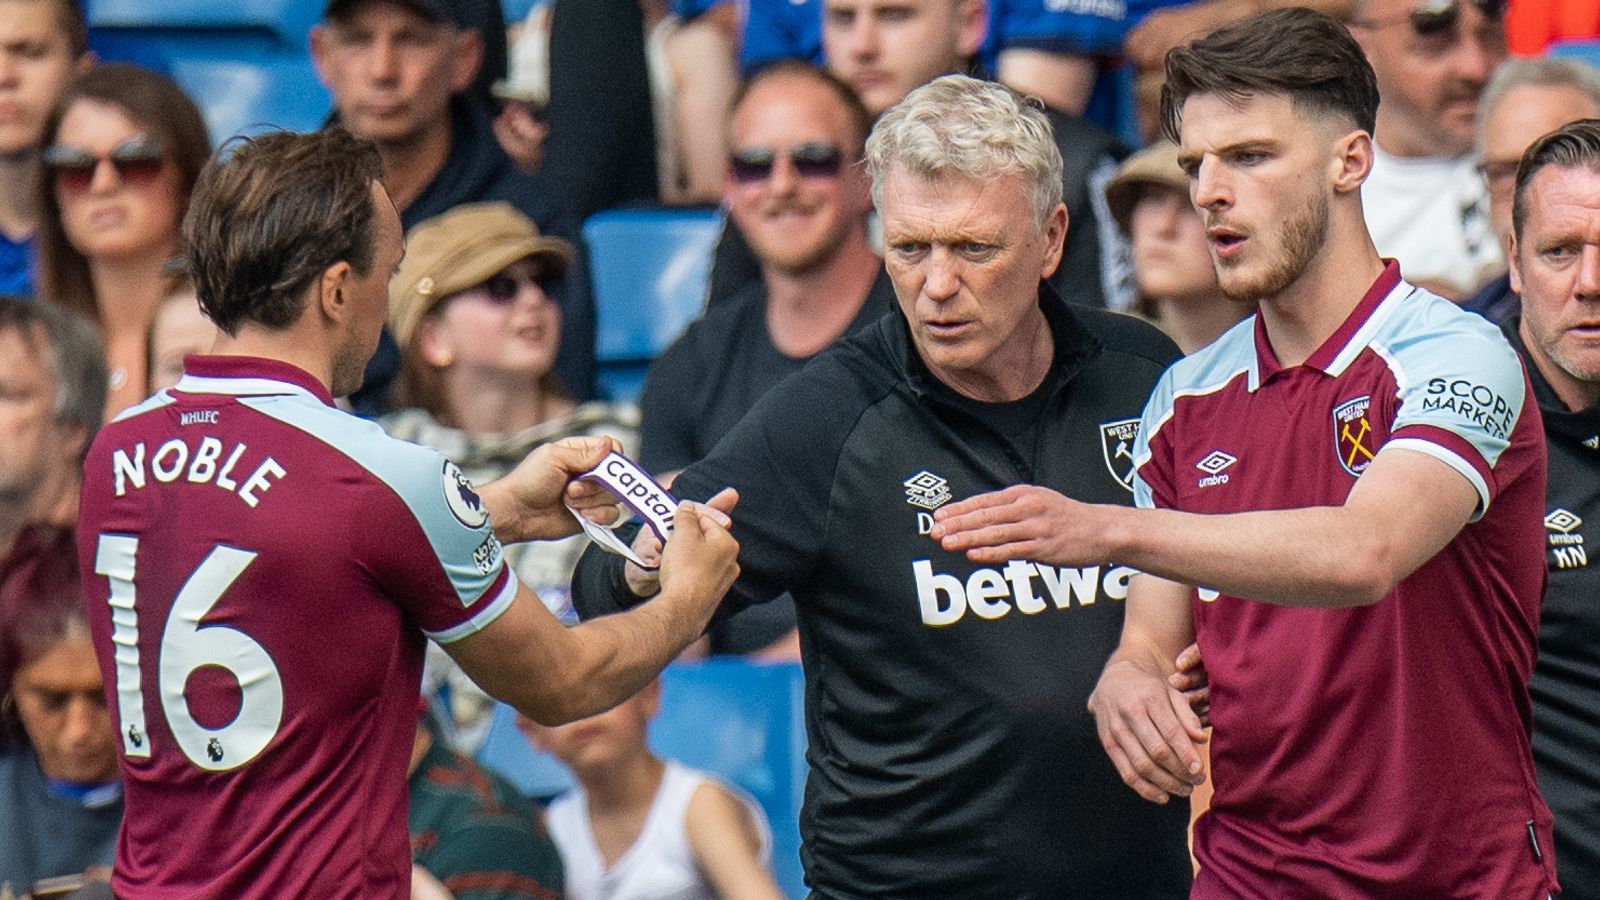 David Moyes: Declan Rice must step up to help fill ‘big void’ left by retired Mark Noble at West Ham